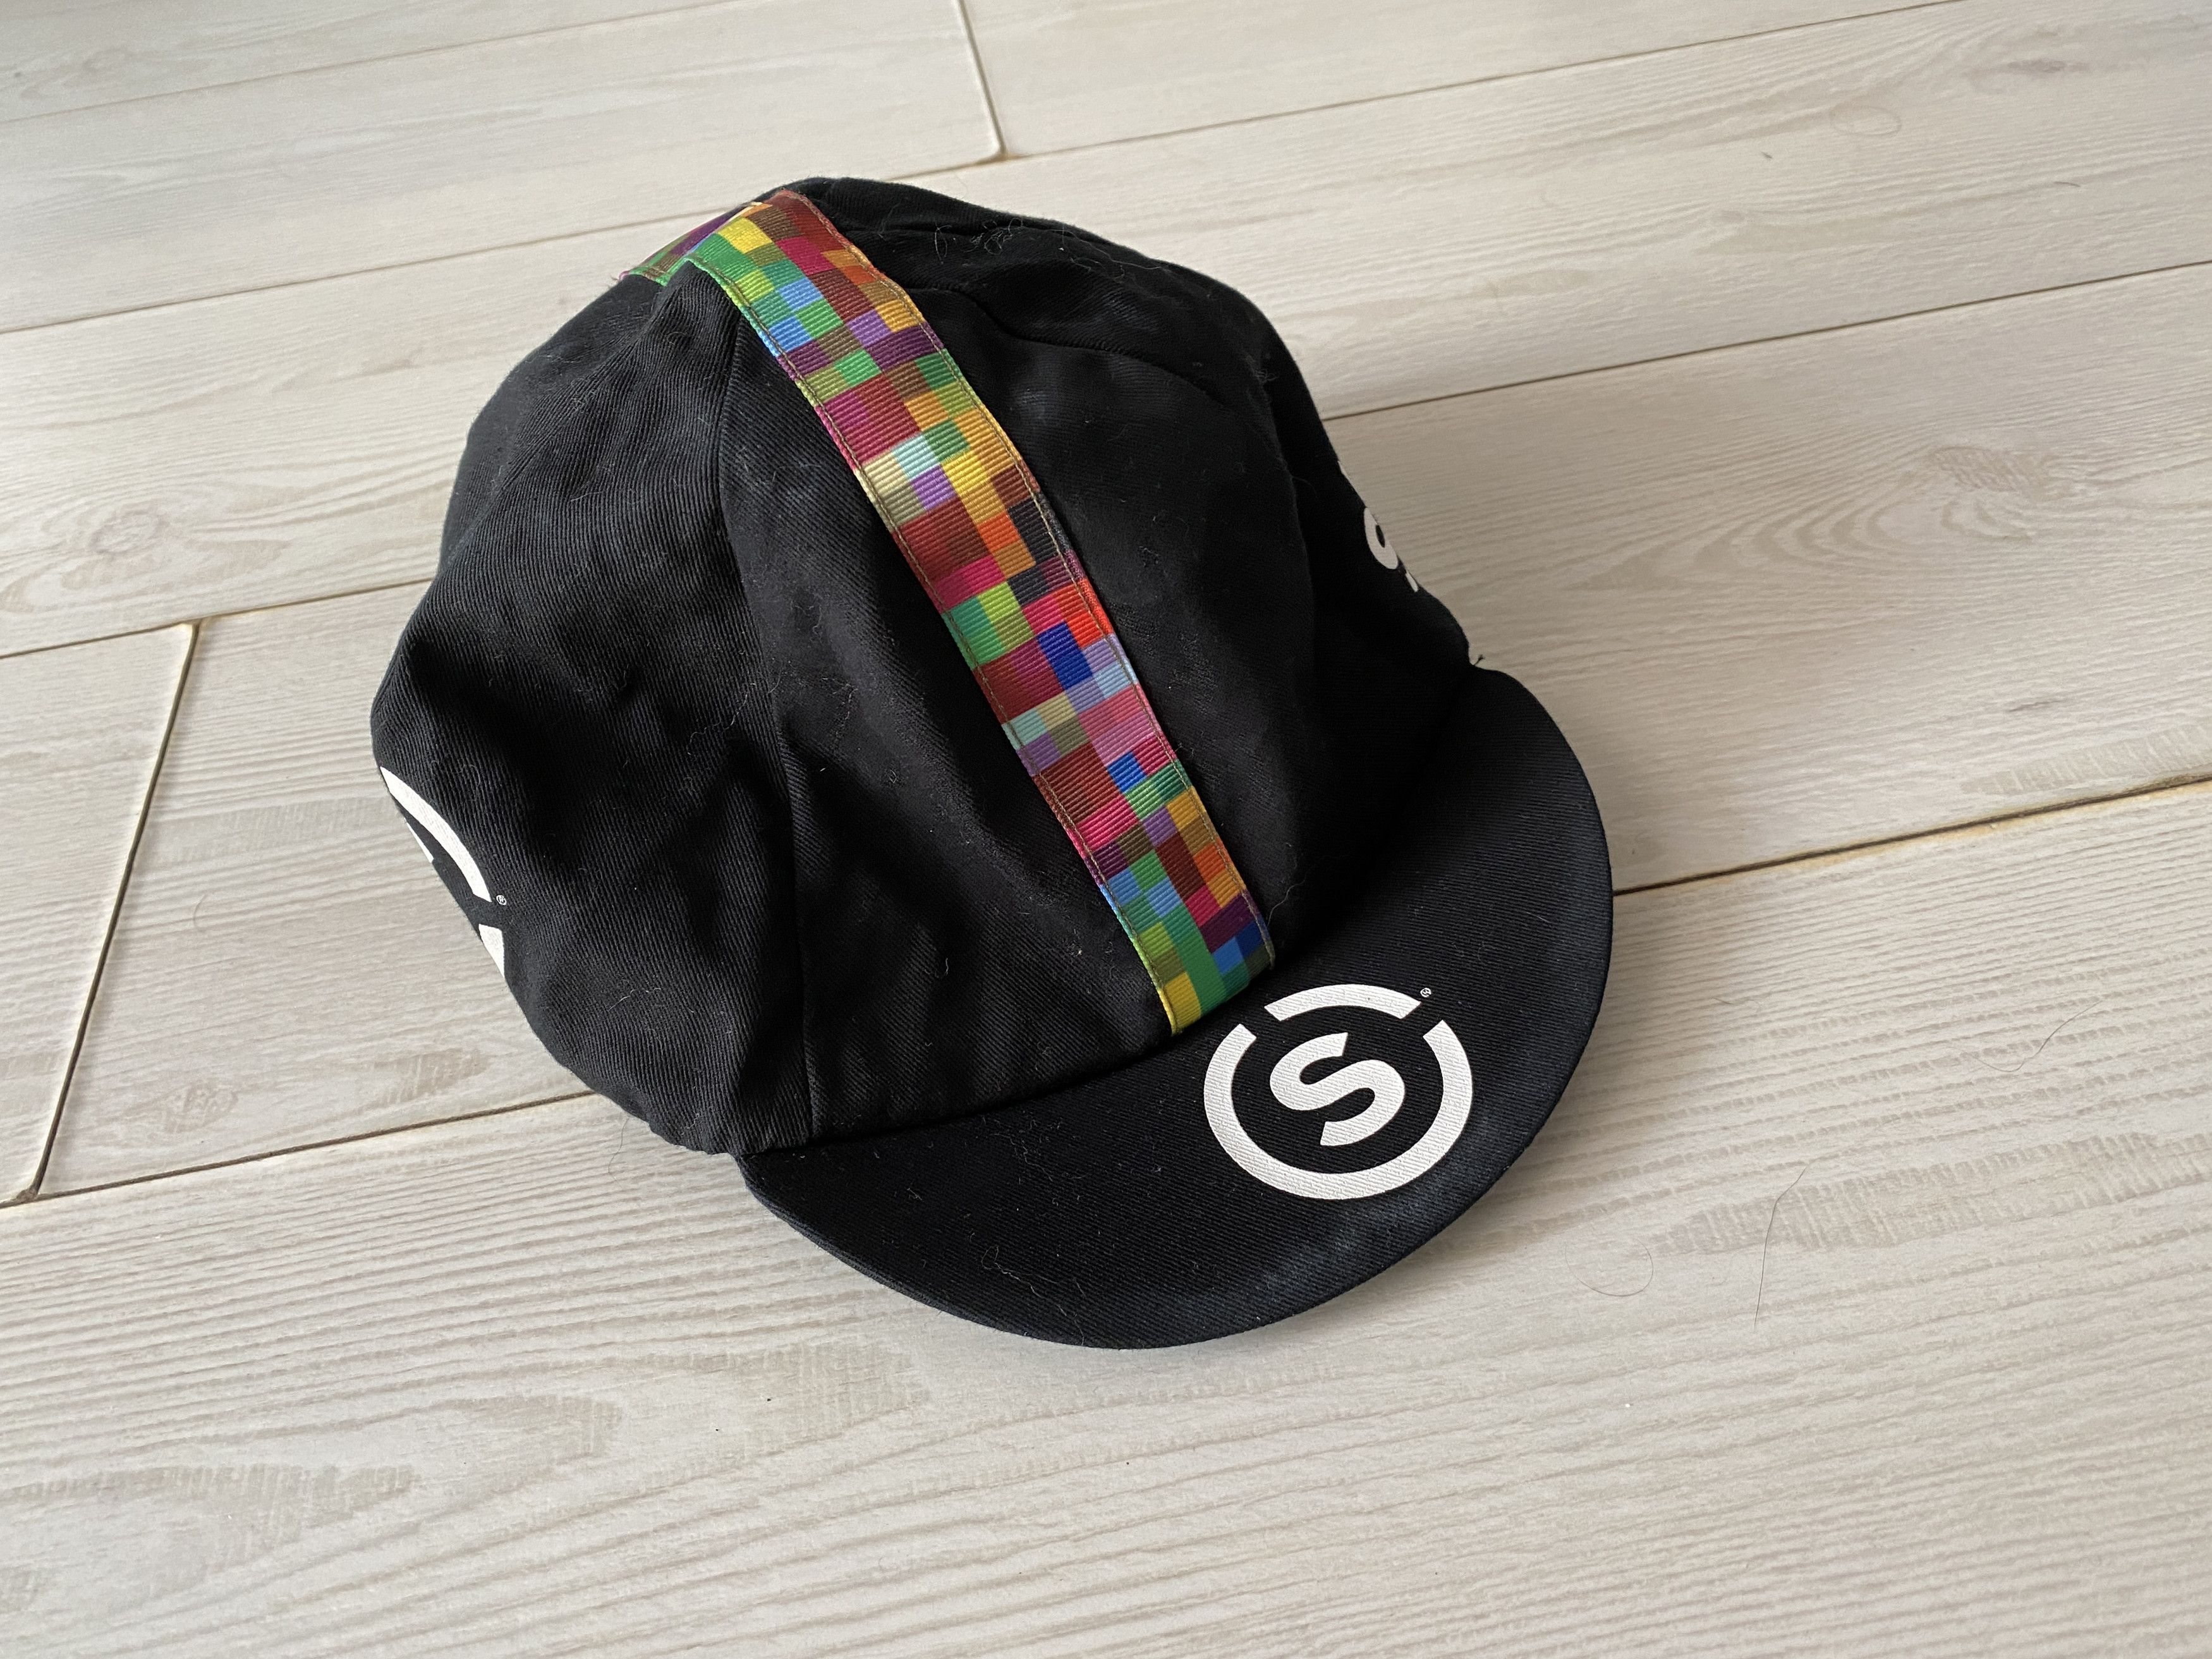 Cycle skratch labs cycle cycling hat cap | Grailed